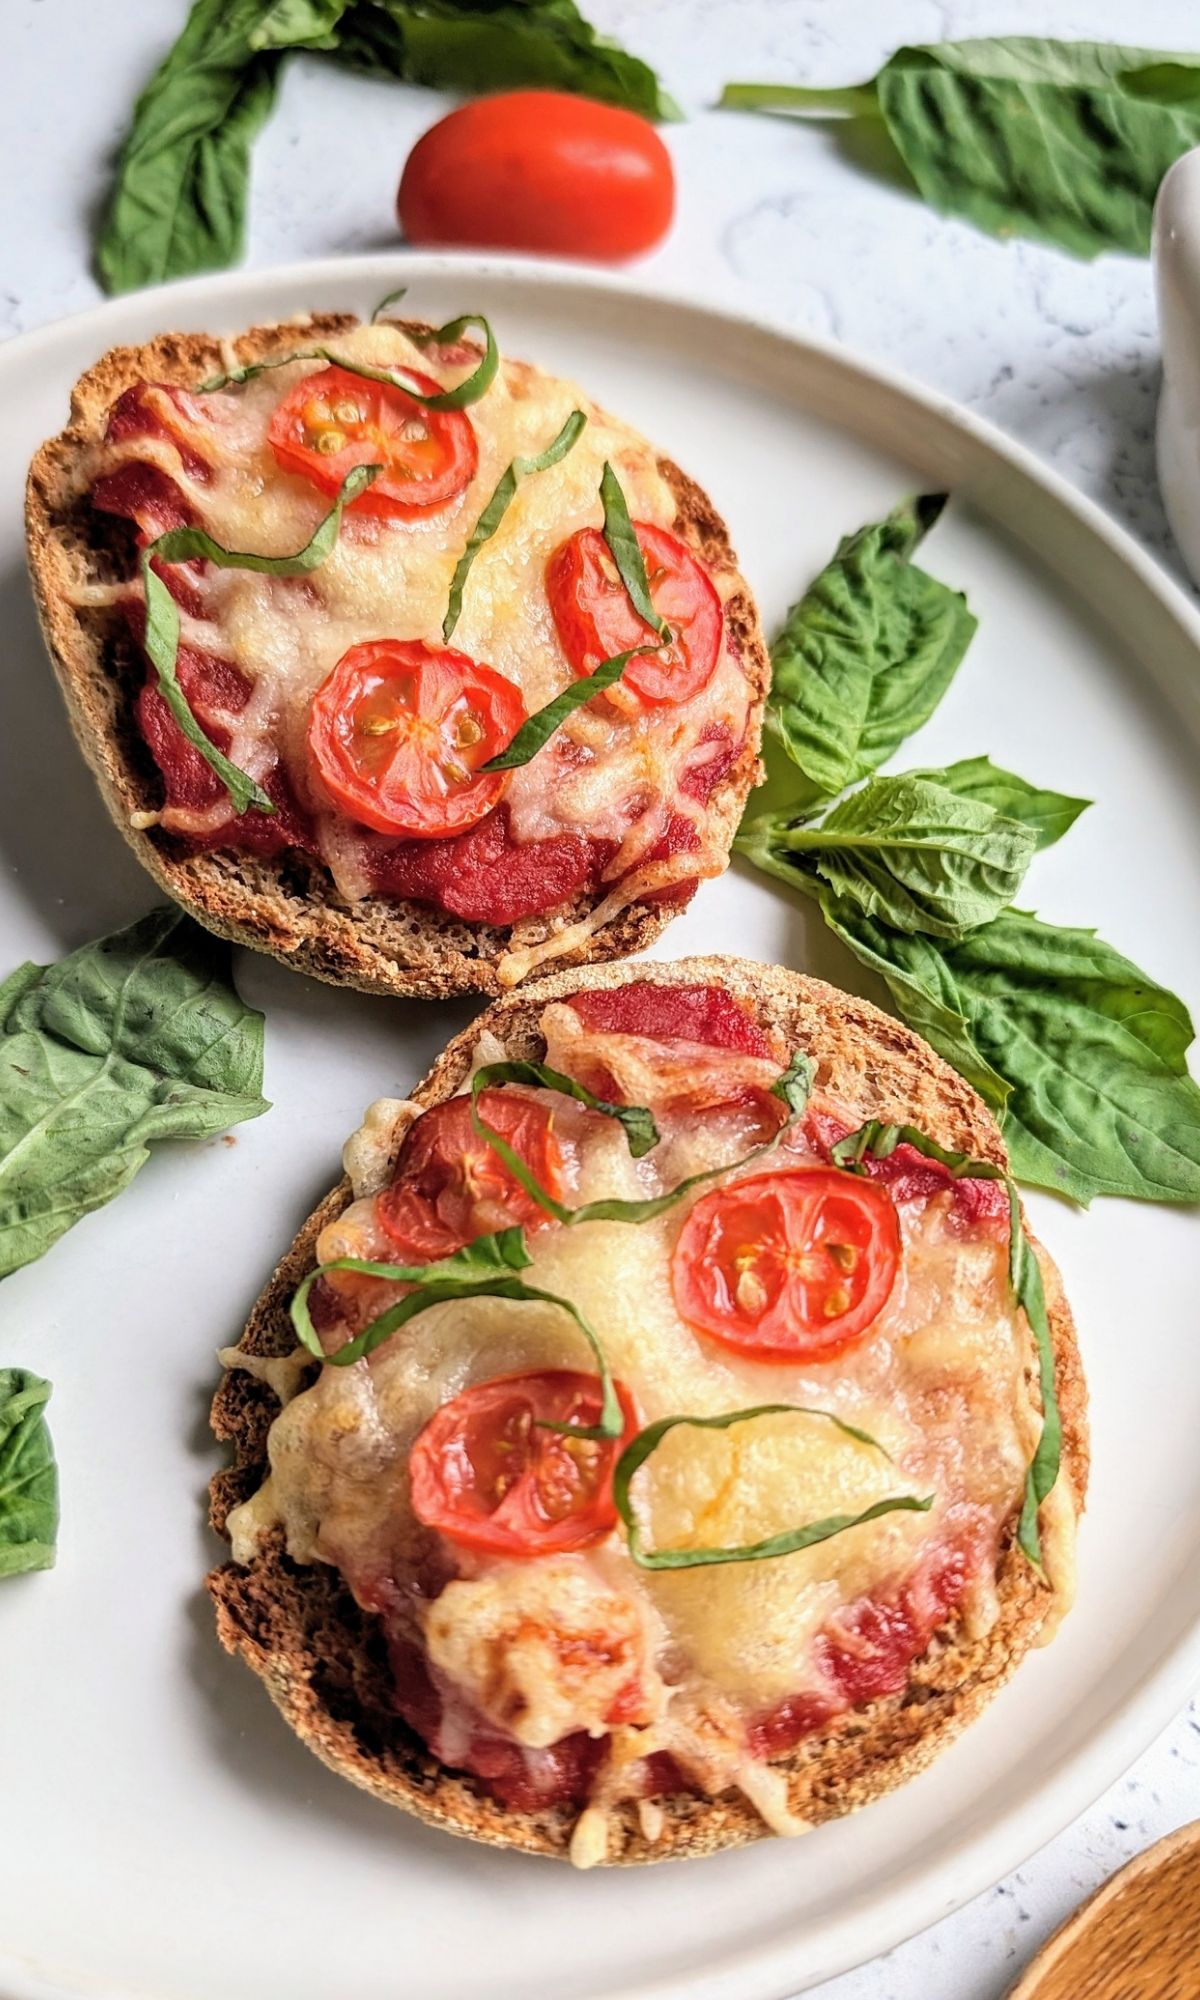 low sodium pizza recipe on english muffins topped with salt free pizza sauce and fresh herbs